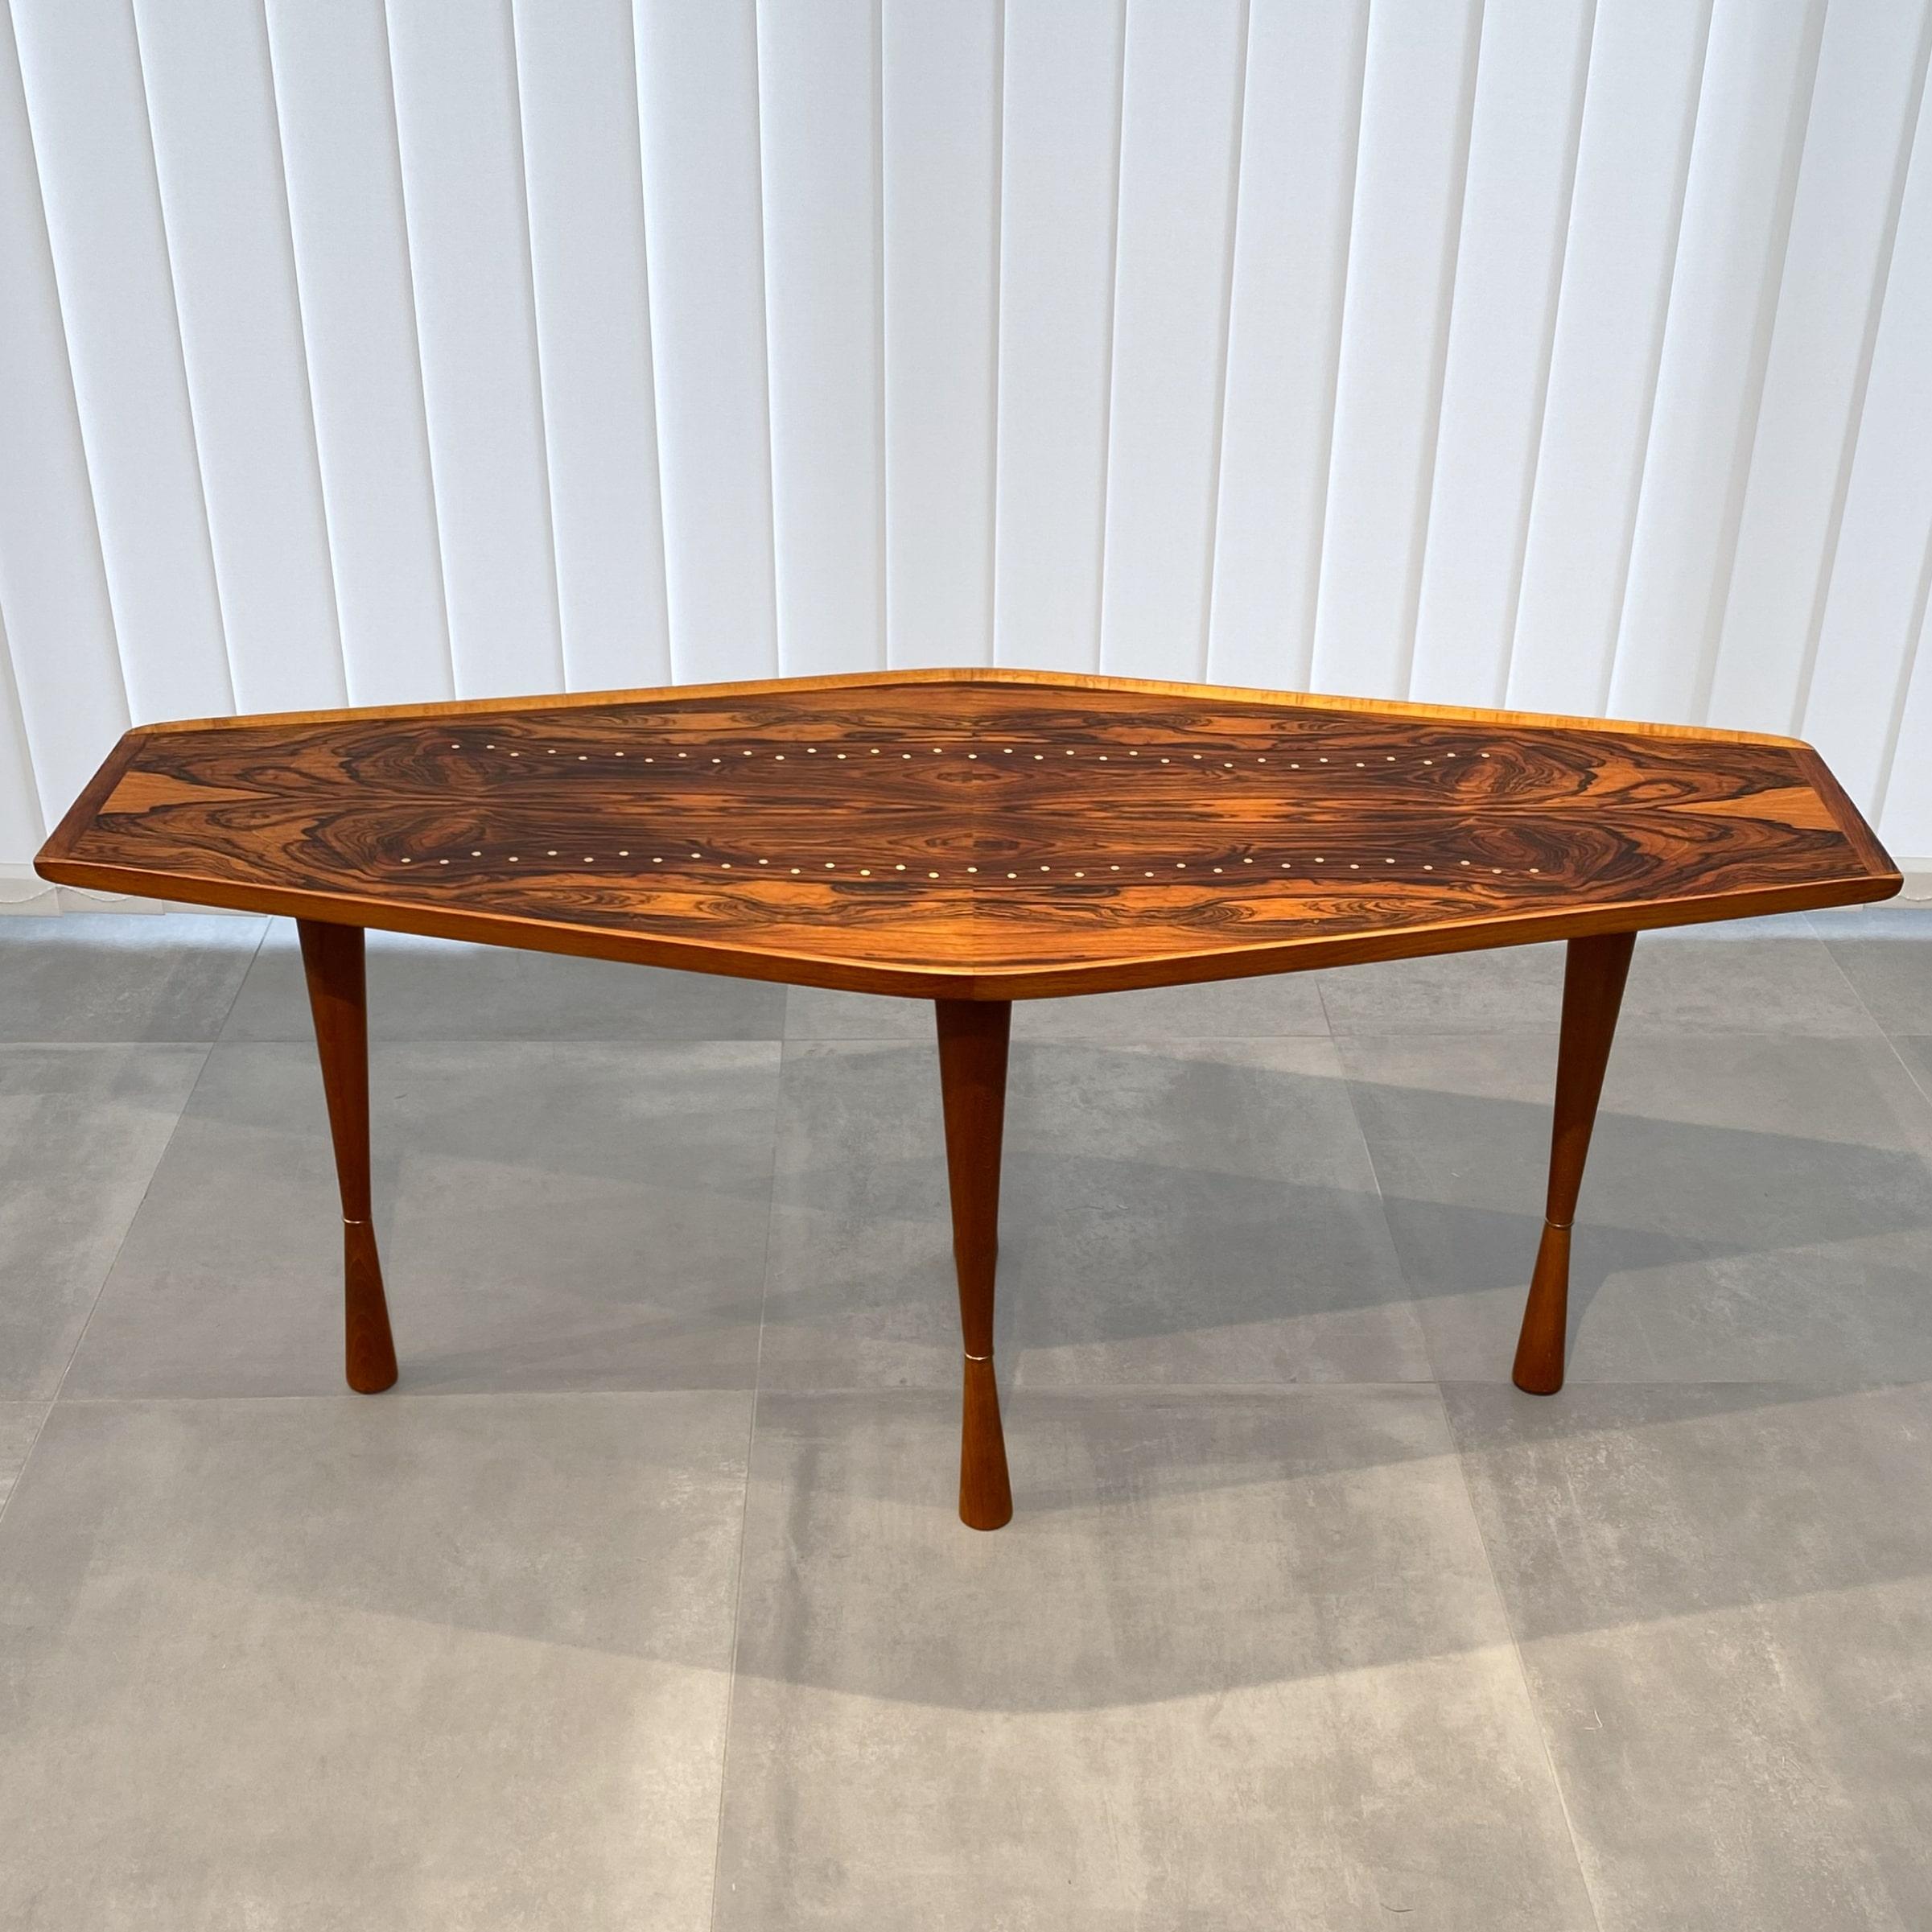 Scandinavian Modern Swedish Modern coffee table with brass inlays, Sweden, 1940s For Sale